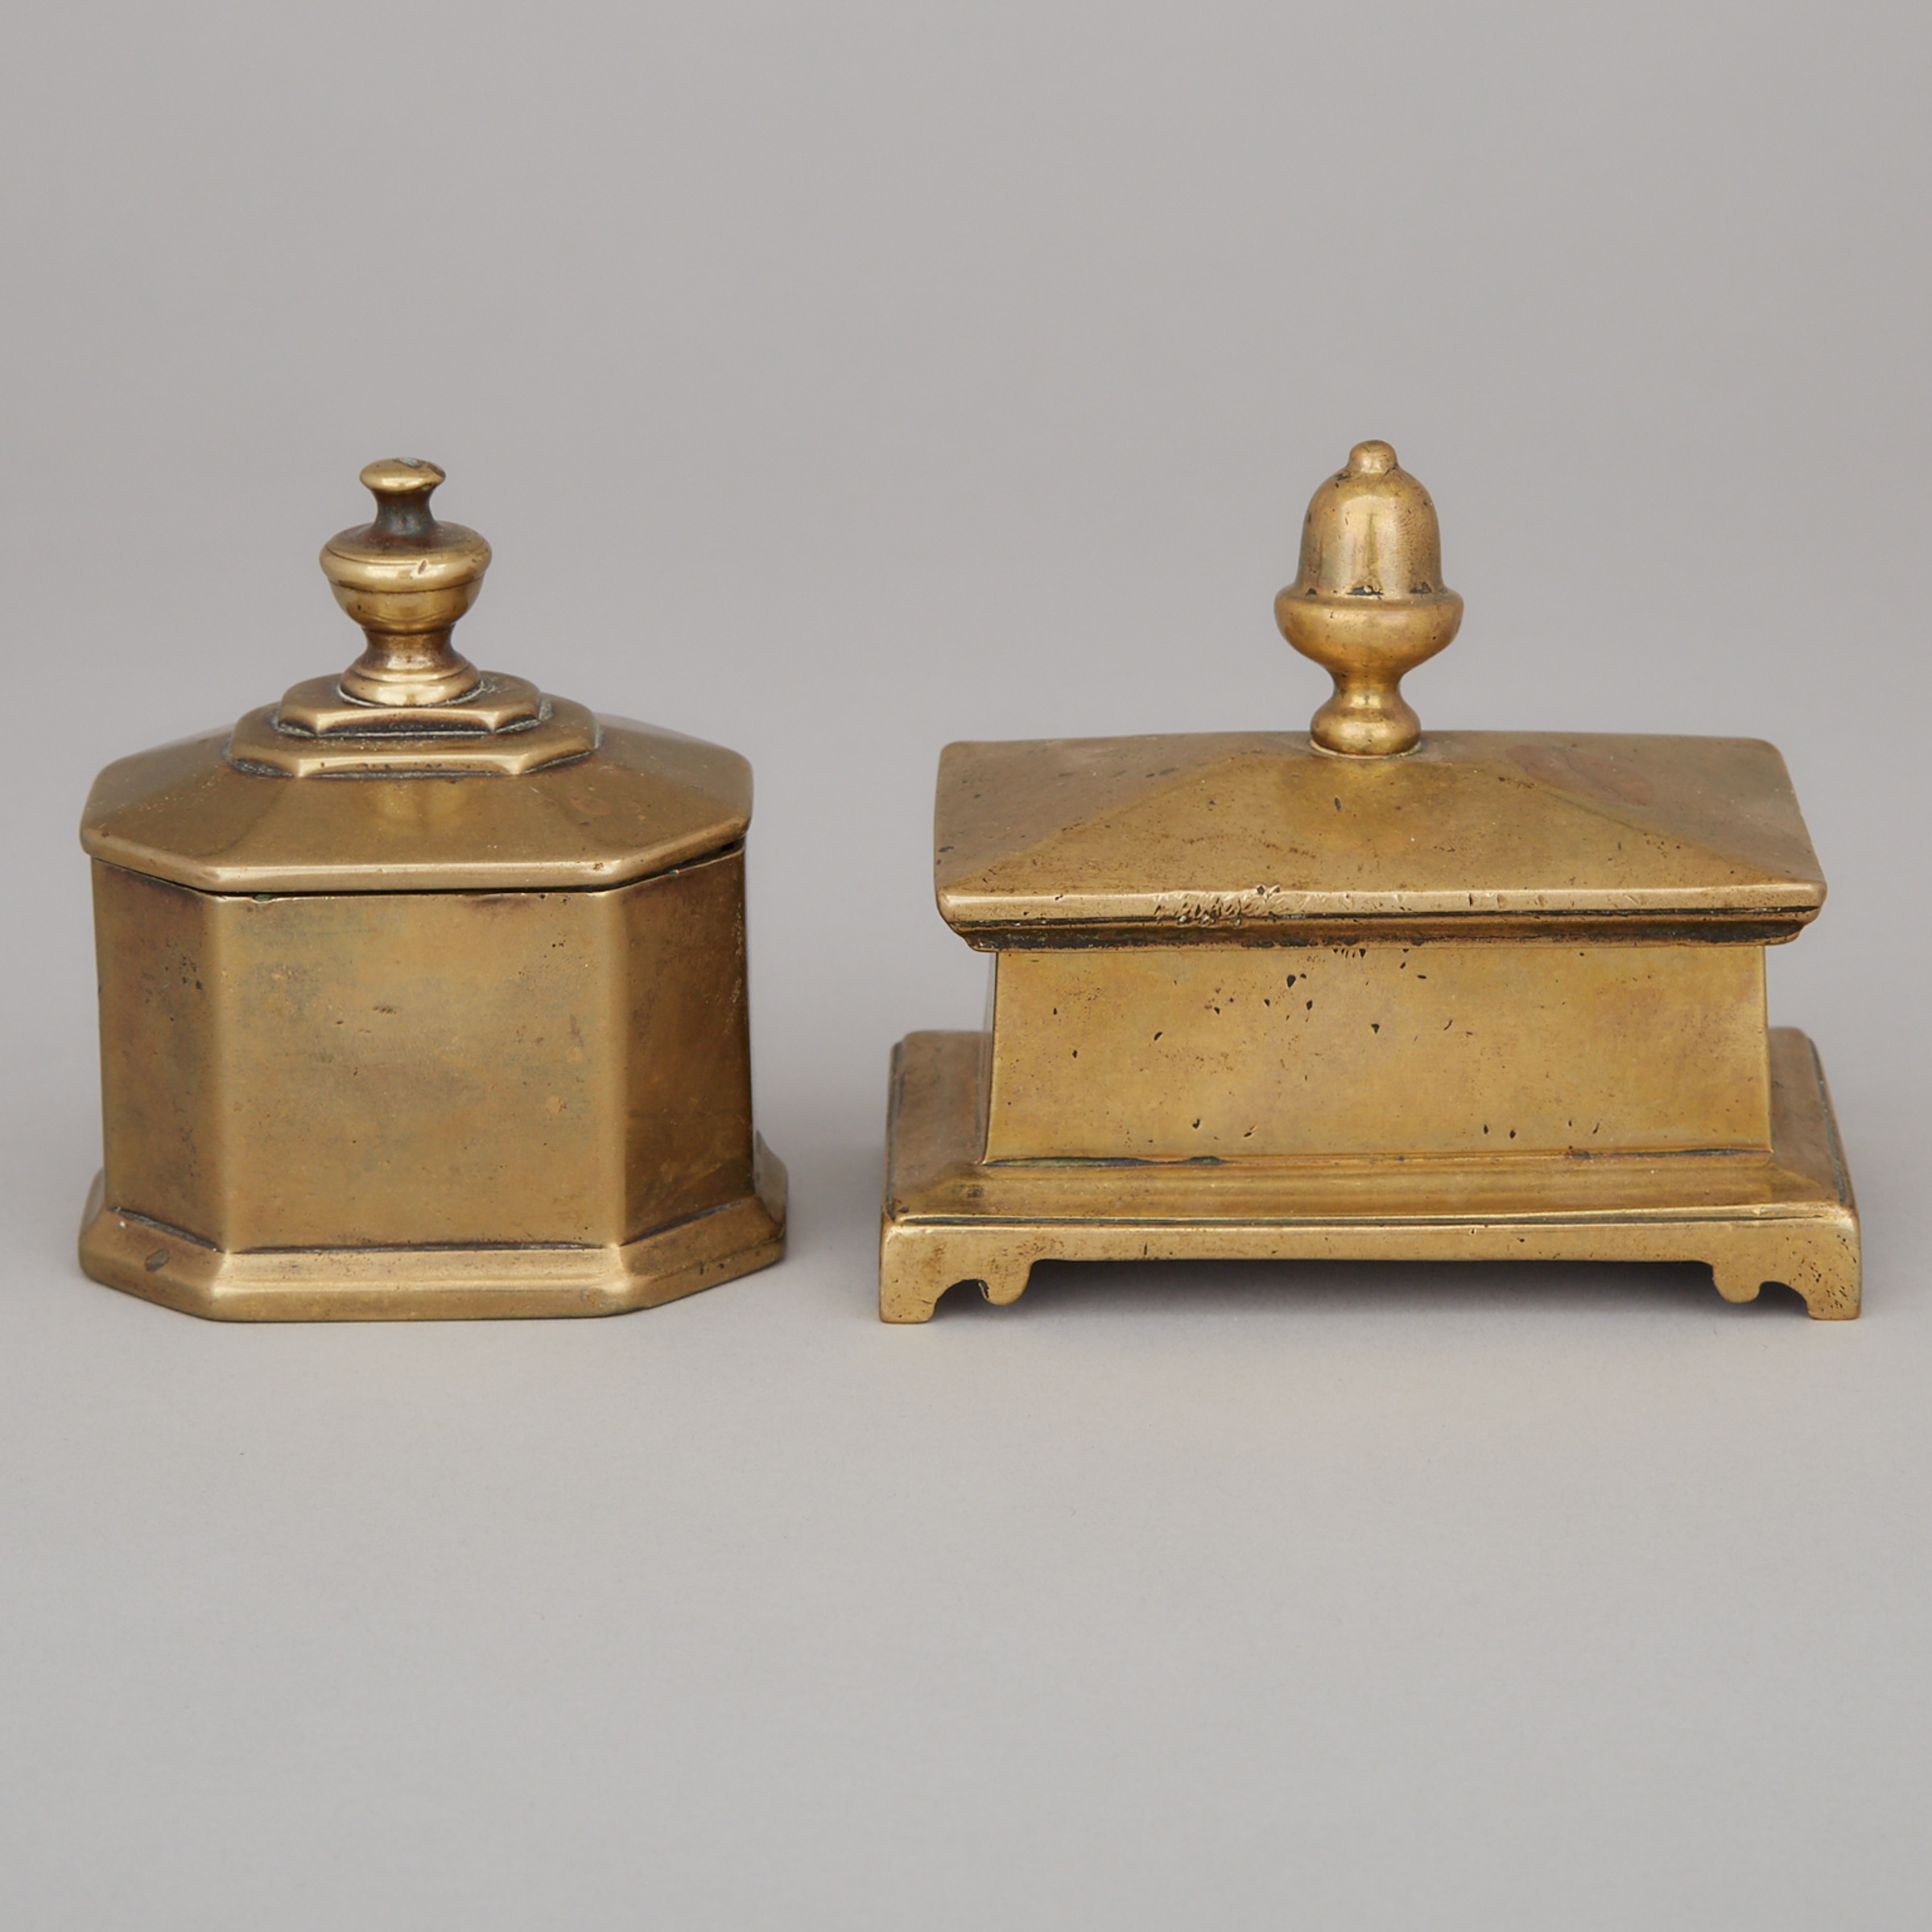 Two Dutch Brass Tobacco Boxes, mid 18th century